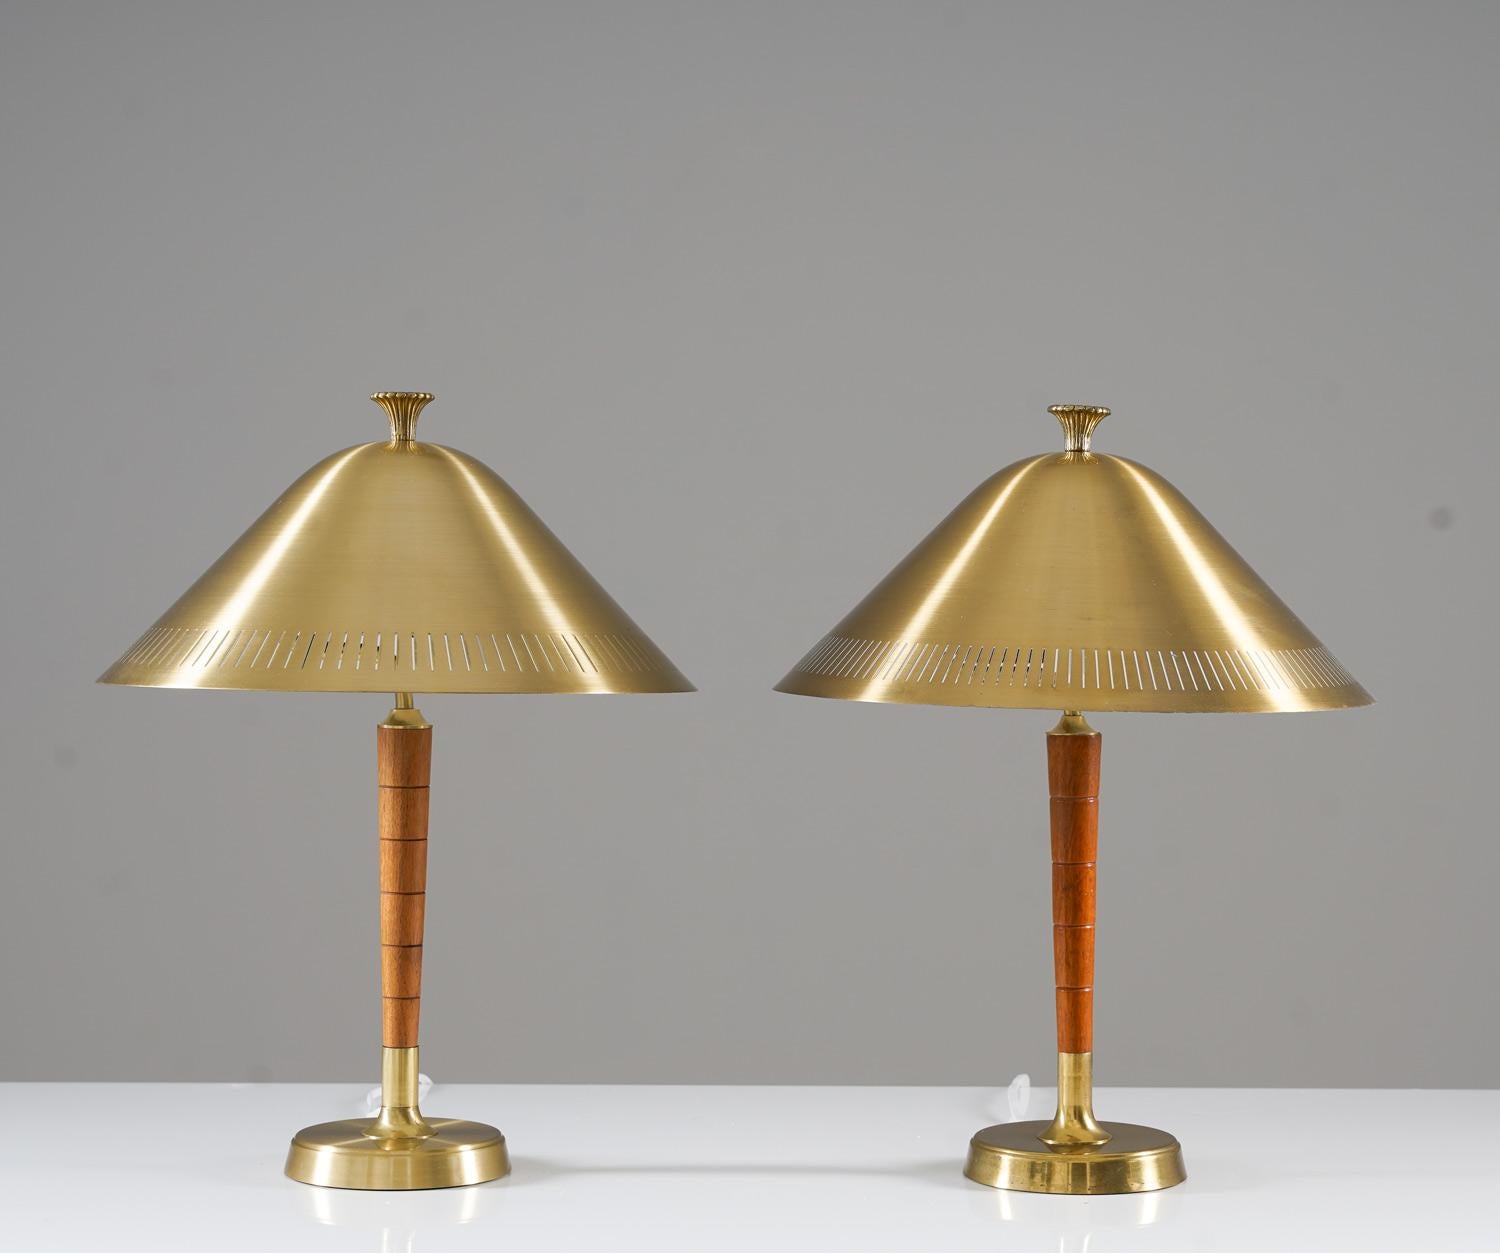 Beautiful table lamps manufactured by Falkenbergs Belysning, Sweden.
The lamps offer a large perforated brass shade, hiding the bulb. The shades are supported by brass rods with wooden details. 

Condition: Good original condition with signs of